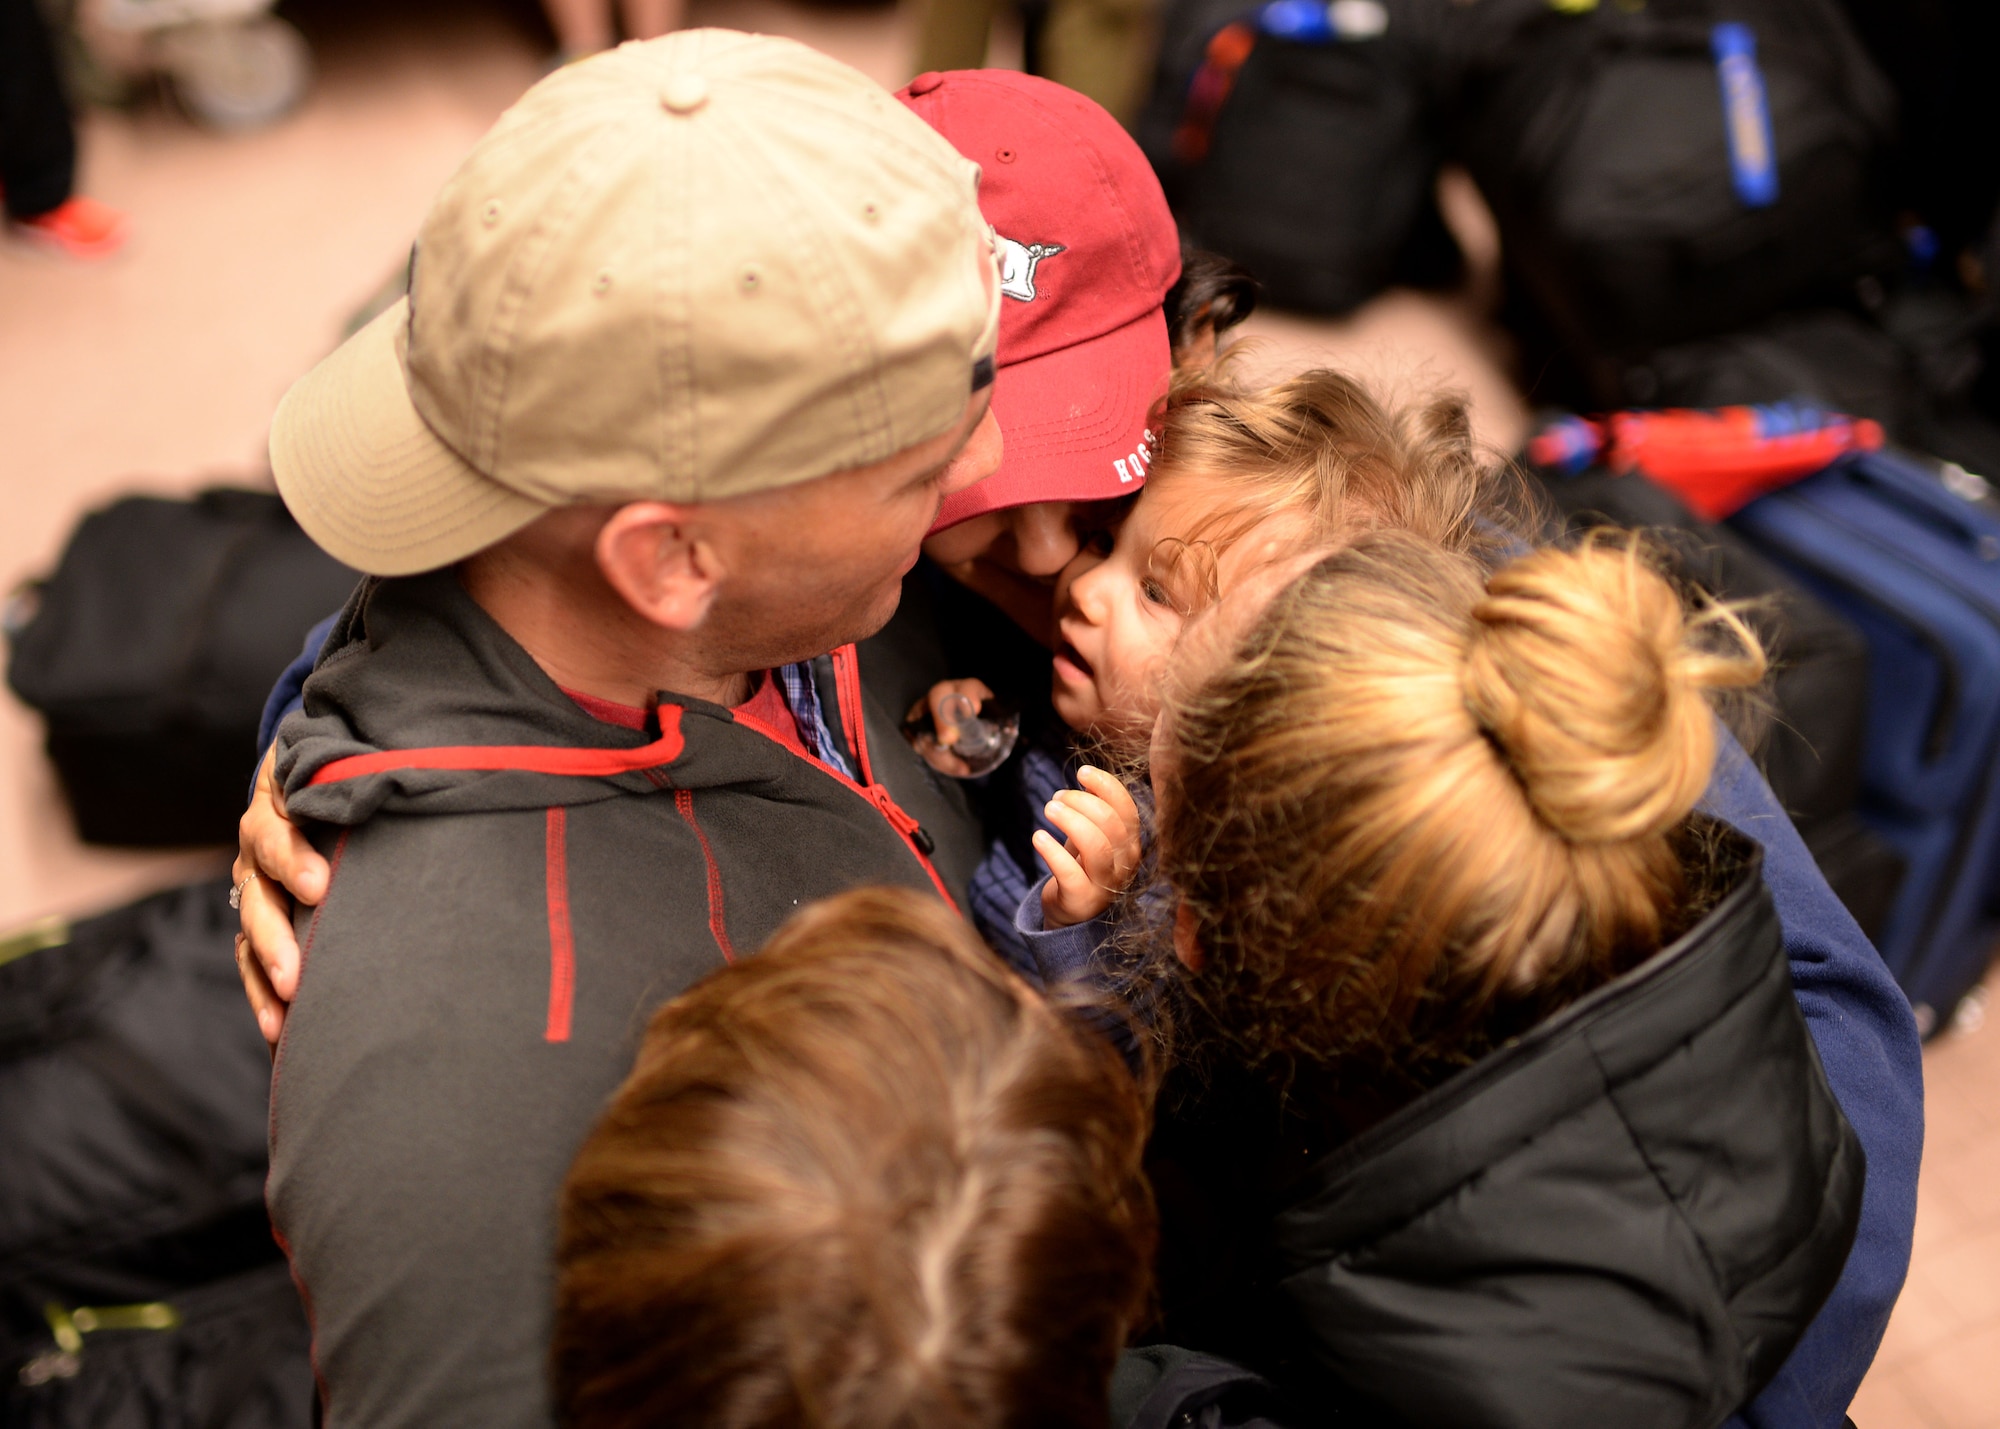 U.S. Air Force Capt. Eric Thonvold, 606th Air Control Squadron, hugs his family Oct. 7, 2014, at Spangdahlem Air Base, Germany, before departing for Southwest Asia in support of Operation Enduring Freedom. The airspace control they provide affects operations ranging from combat to transportation. (U.S. Air Force photo by Staff Sgt. Daryl Knee/Released)